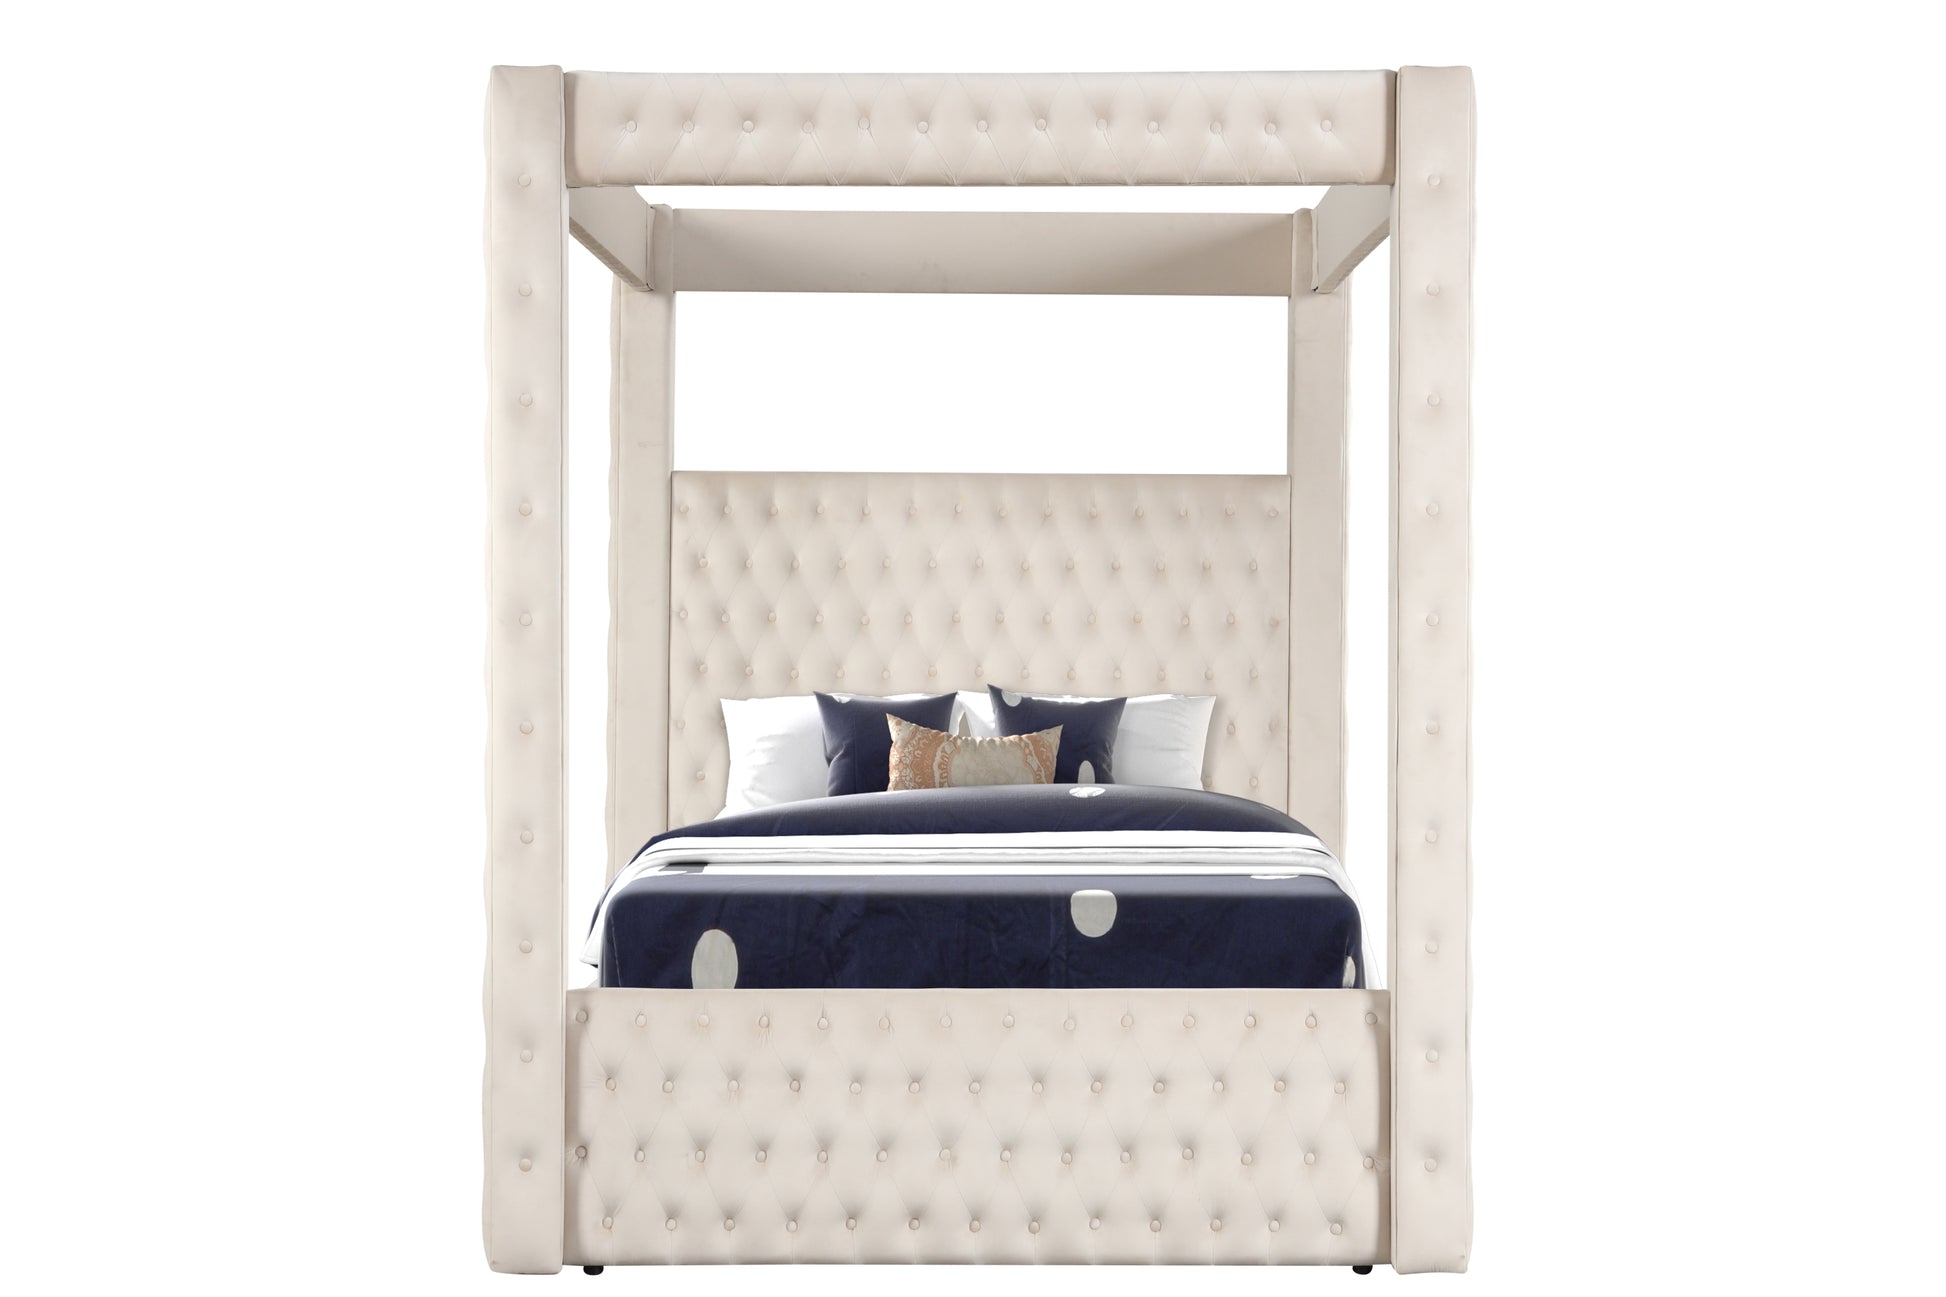 Monica luxurious Four-Poster Full 5 Pc Bed Made with Wood in Cream - Enova Luxe Home Store